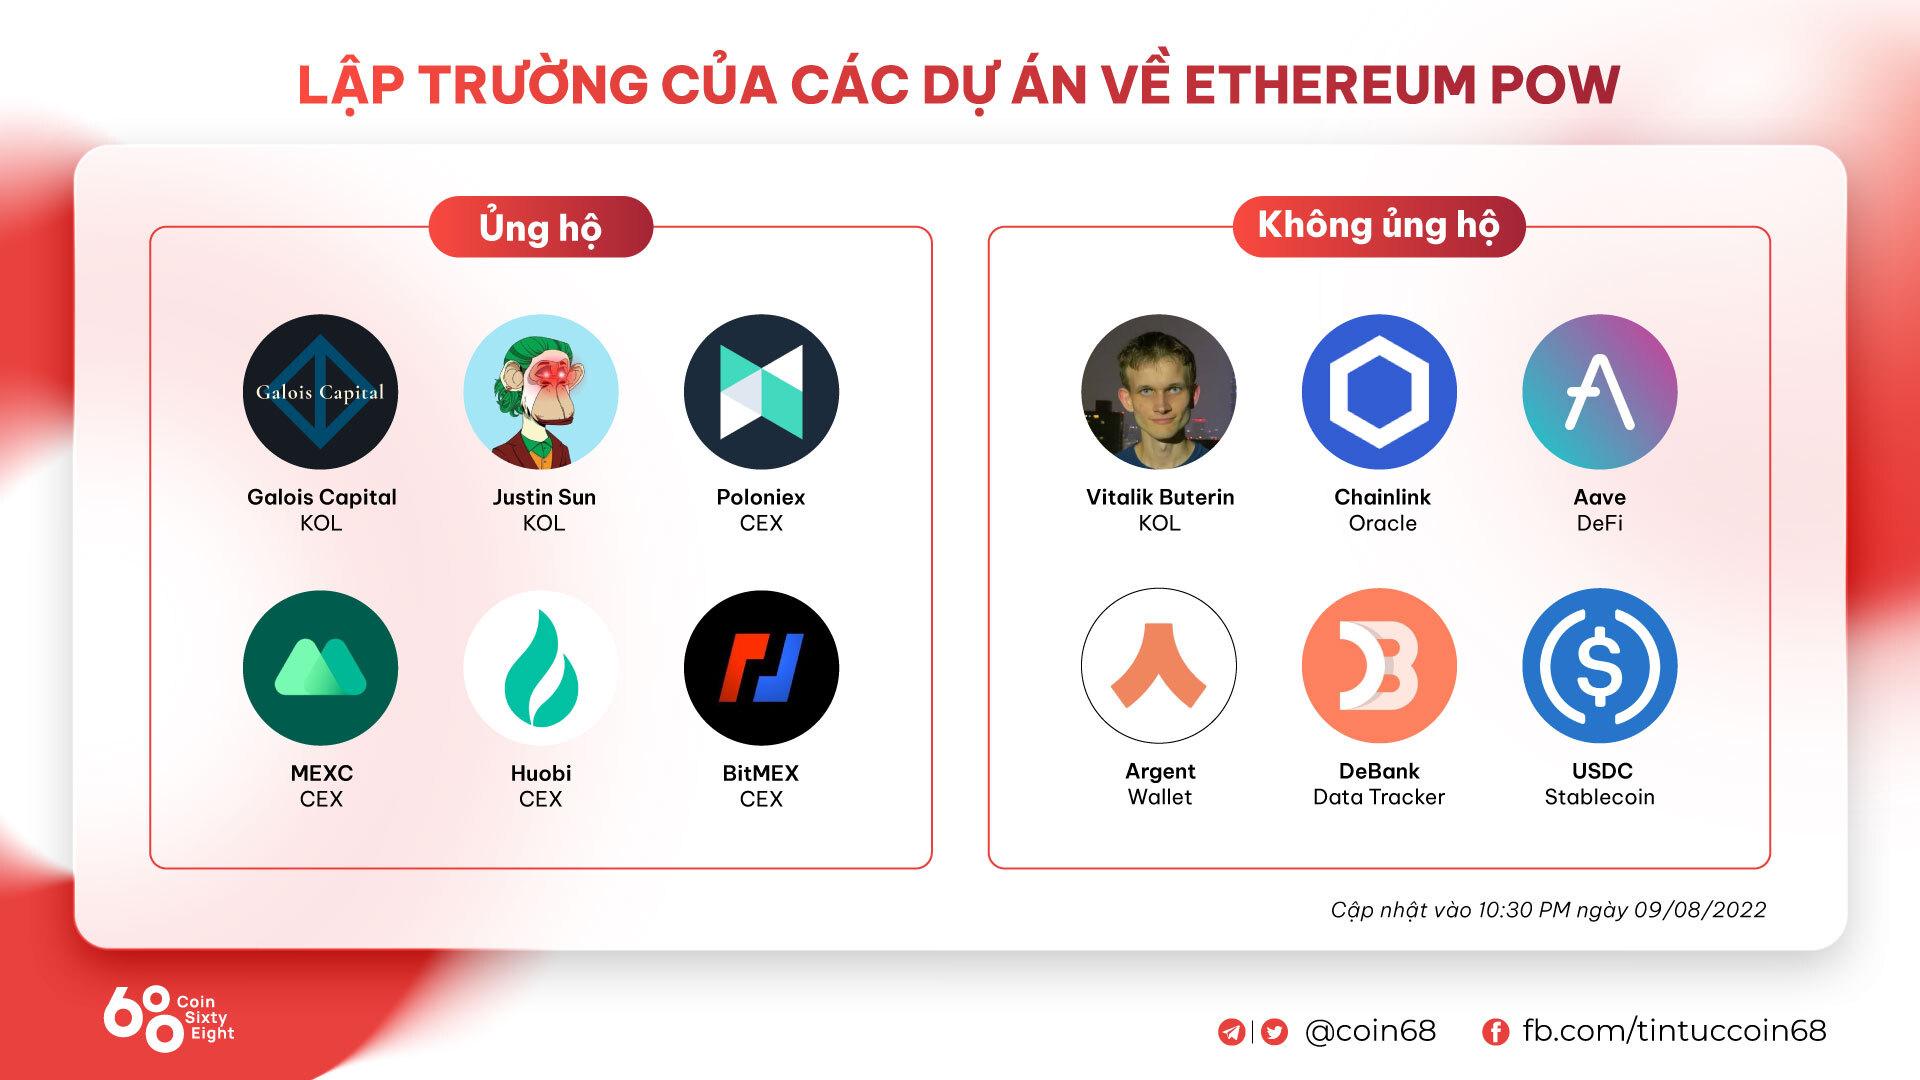 circle-tuyen-bo-chi-ho-tro-stablecoin-usdc-cho-chuoi-proof-of-stake-cua-ethereum